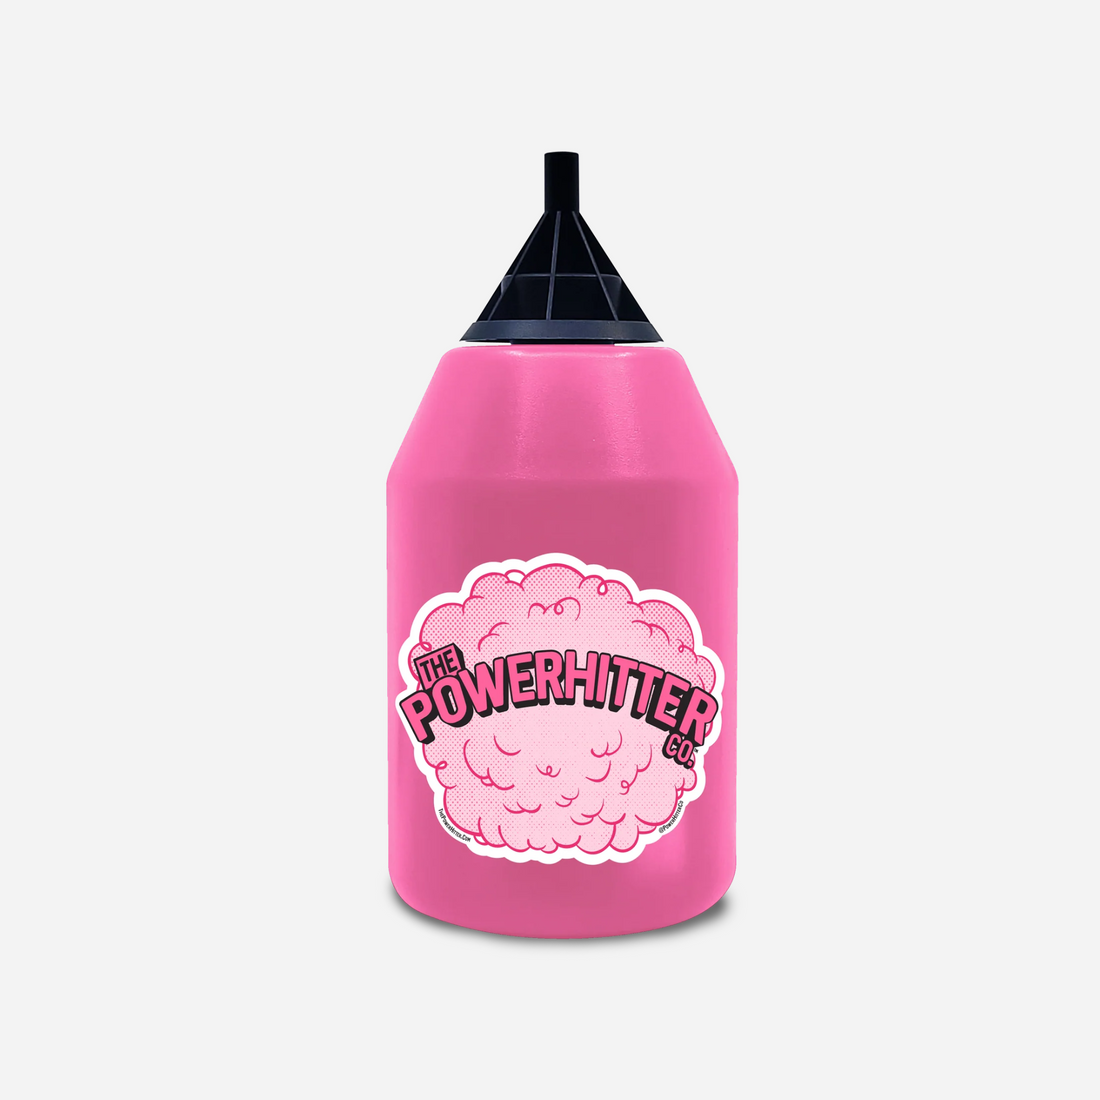 The Pink PowerHitter™, the genuine 50-year-old design for a classic smoking session.